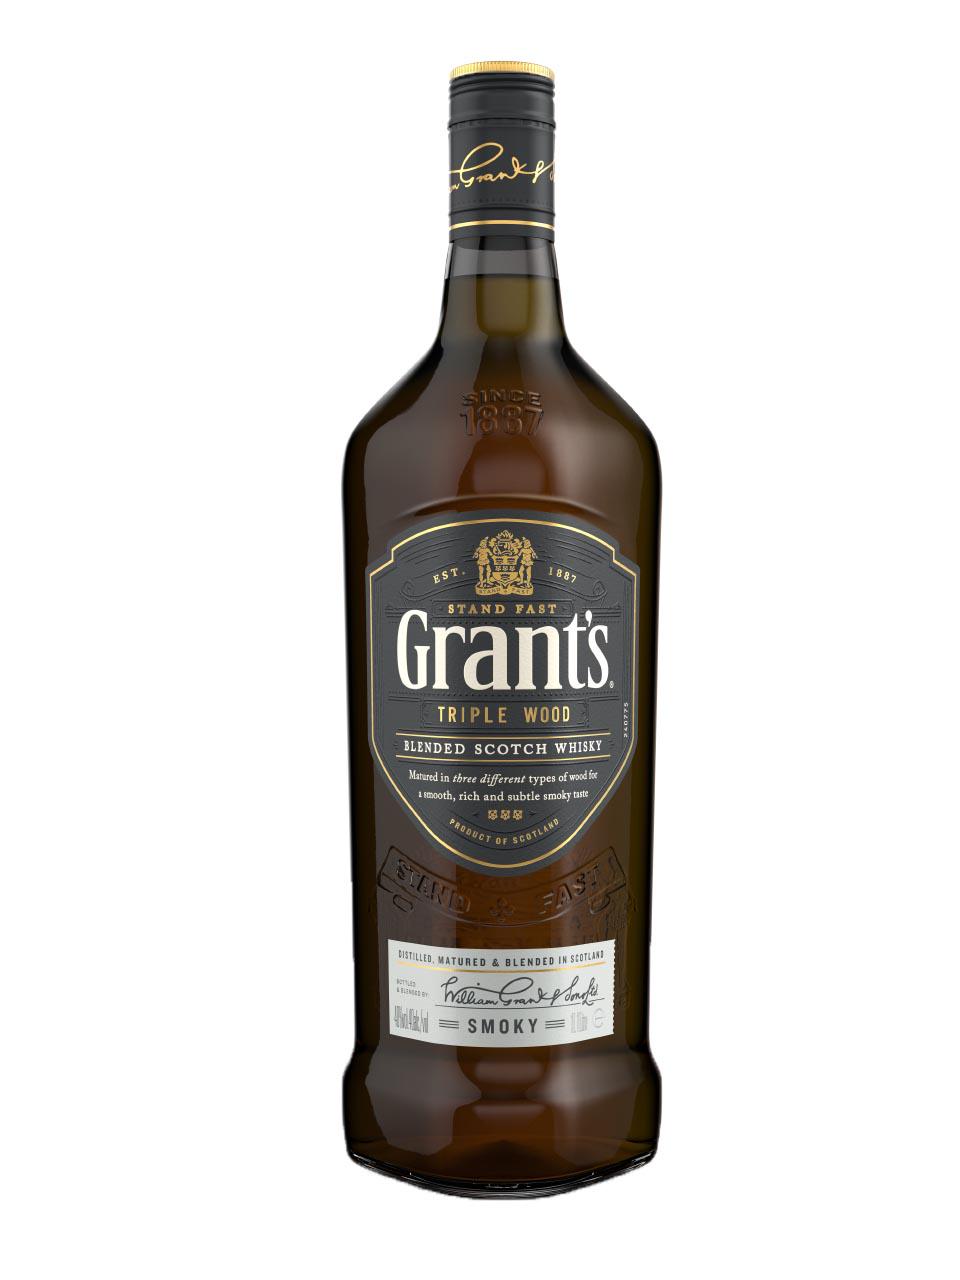 Grant's Triple Wood Smoky Blended Scotch Whisky 40% 1L | Frankfurt Airport  Online Shopping